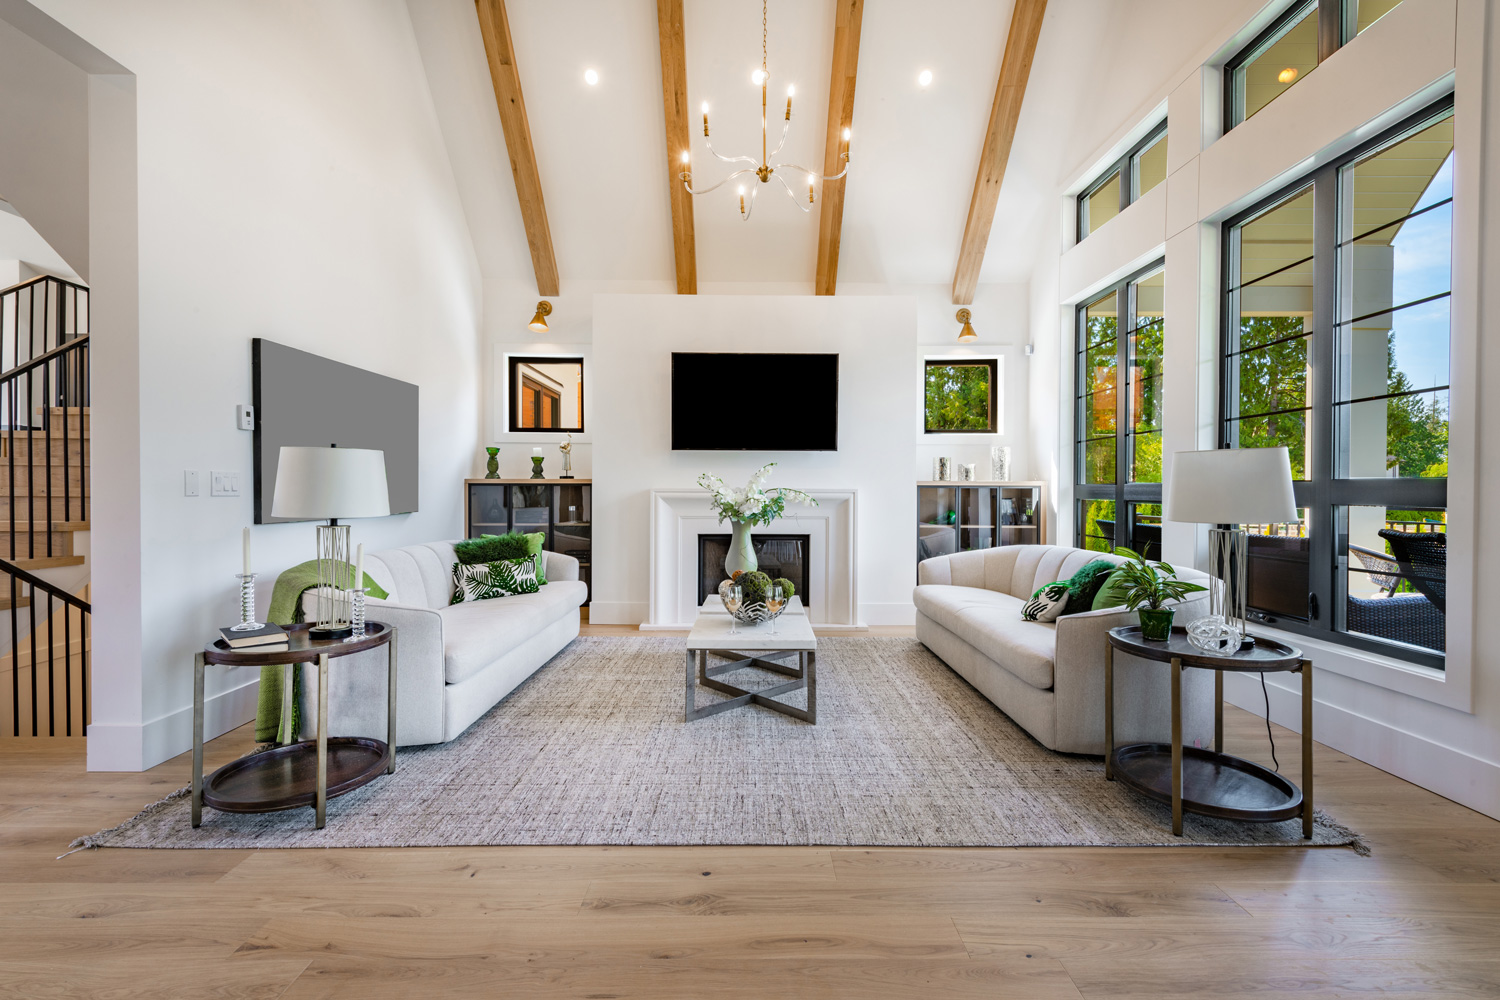 Modern farmhouse style living and family room with large windows cabinets in blues and greens